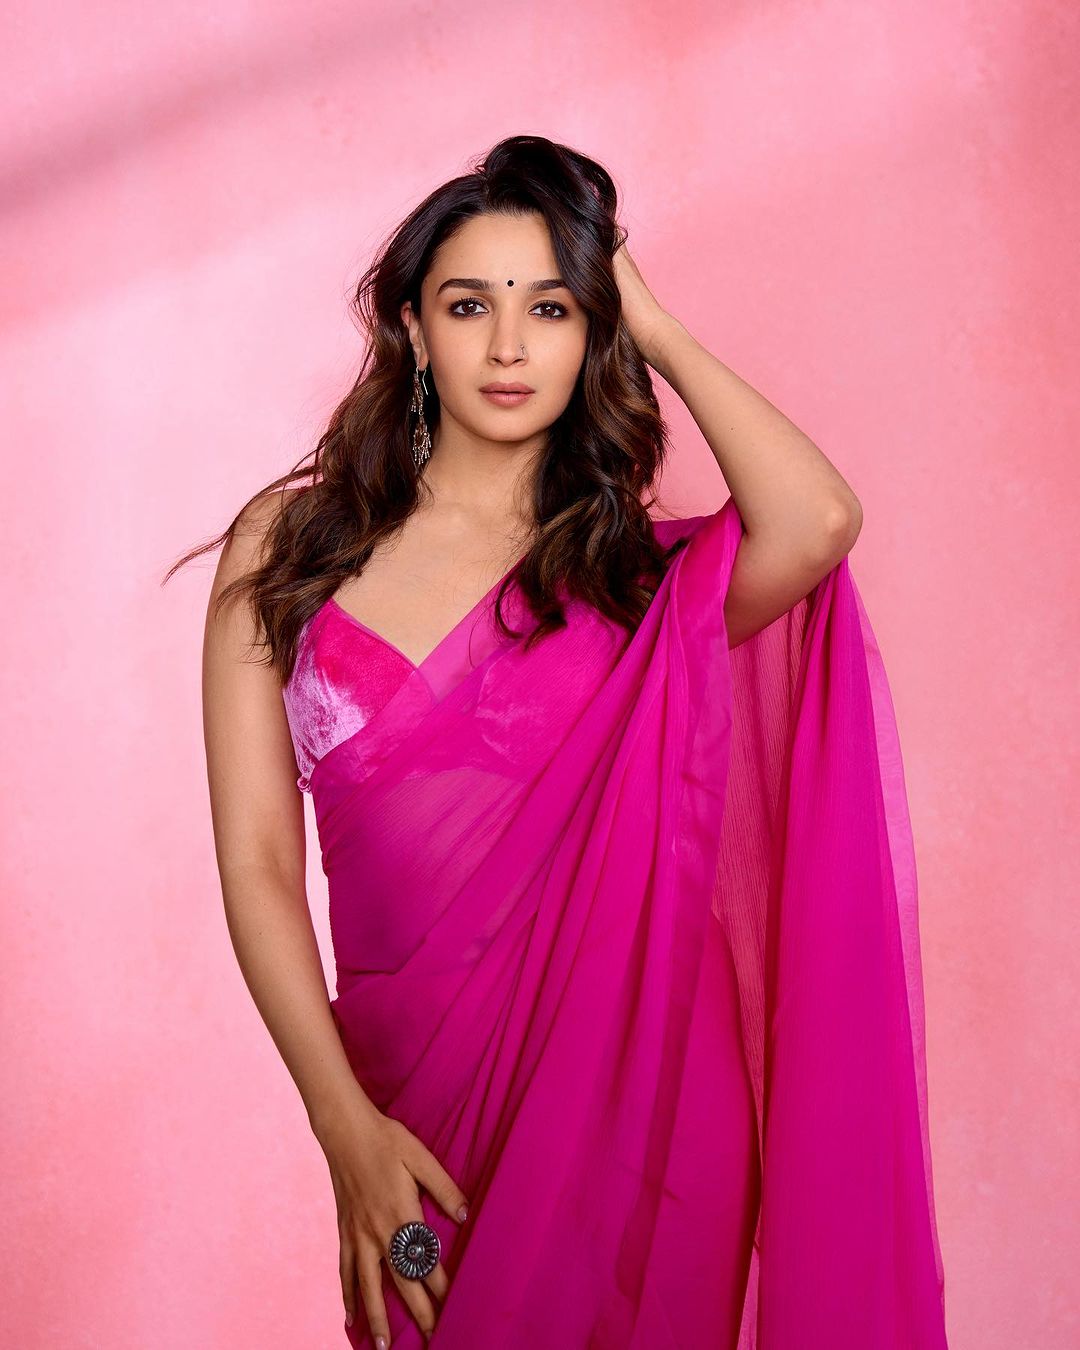 Alia bhatt looks sizziling hot in this saree outfit-Alia Bhatt, Aliabhatt, Bollywoodactess, Bollywood Photos,Spicy Hot Pics,Images,High Resolution WallPapers Download